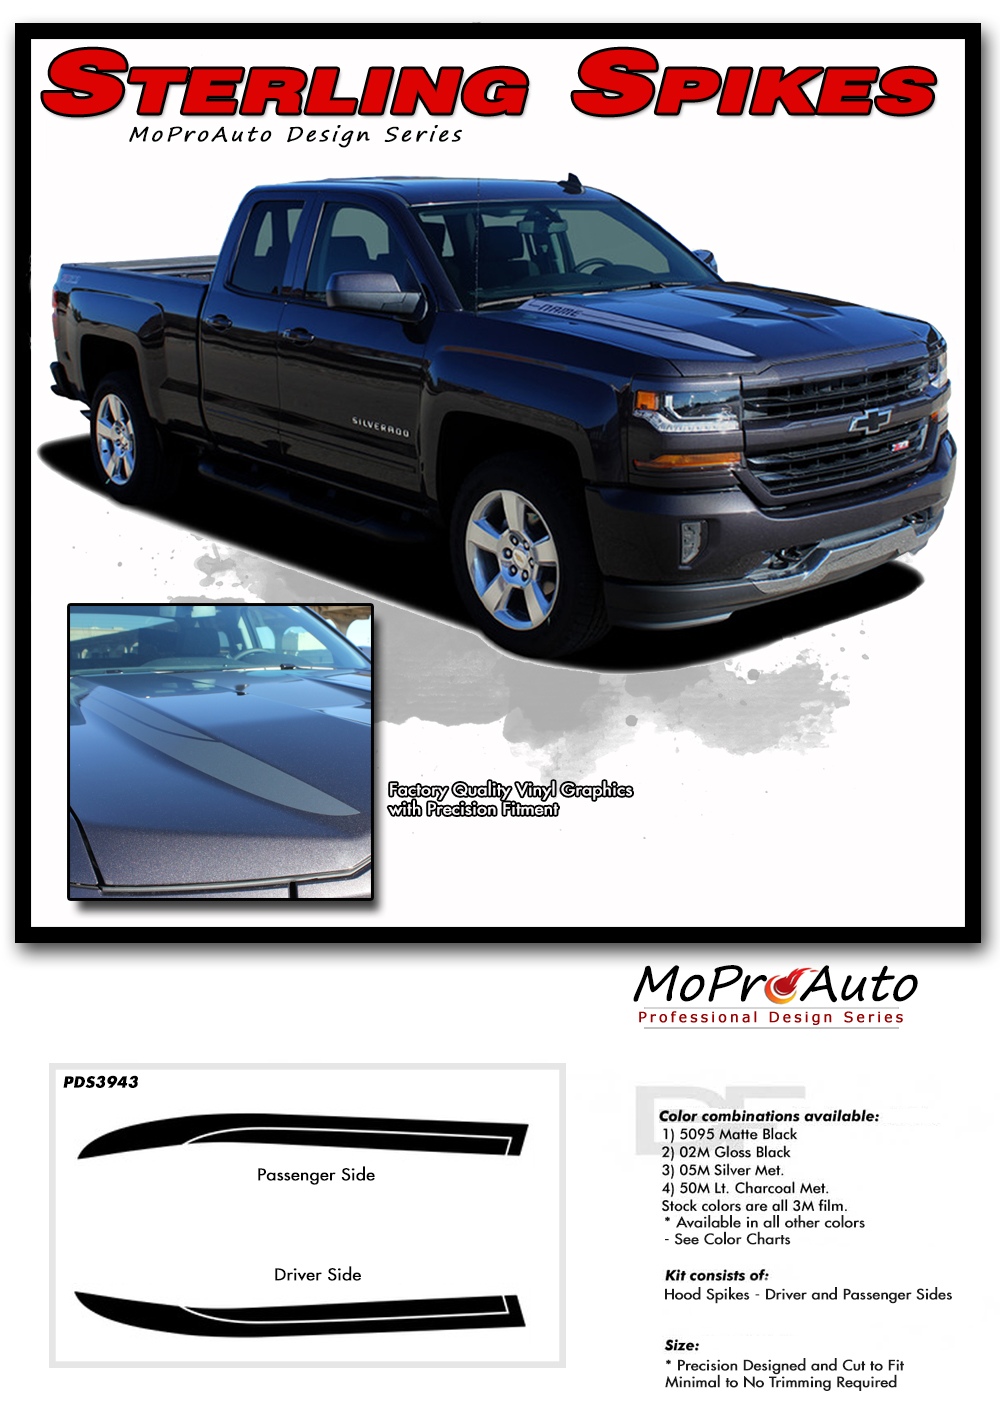 CHEVY SILVERADO SPIKES - MoProAuto Pro Design Series Vinyl Graphics, Stripes and Decals Kit